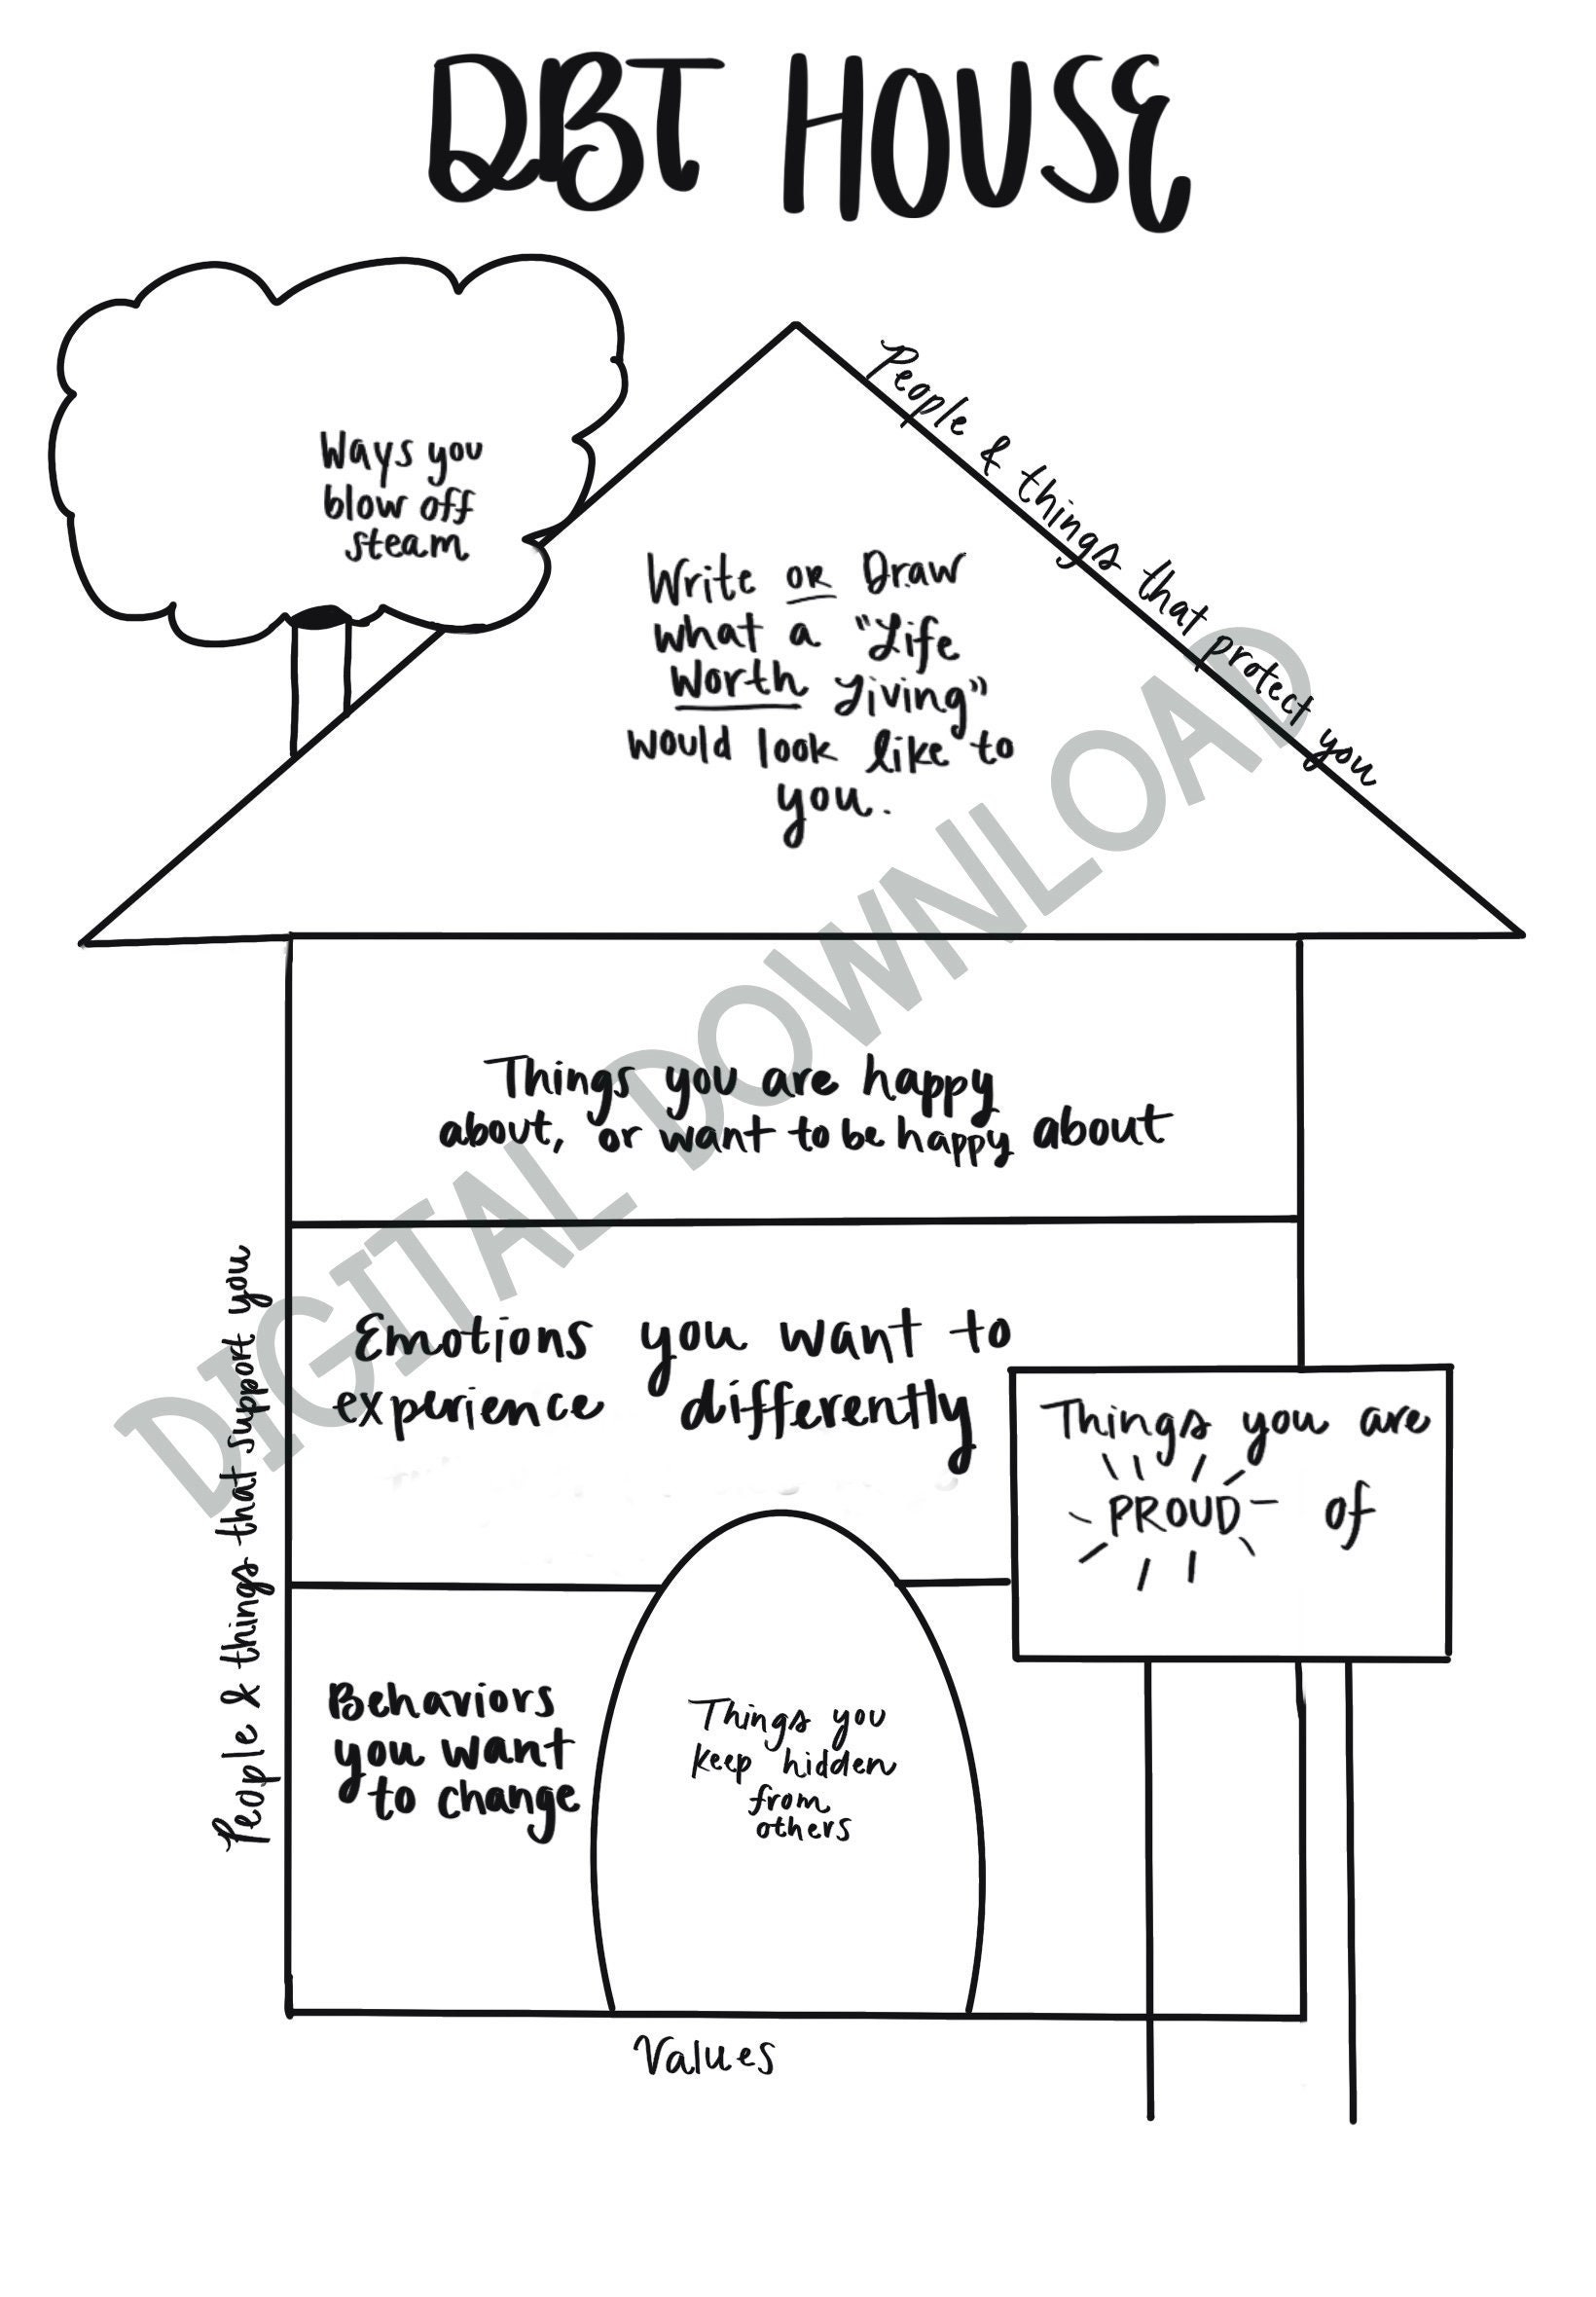 DBT House Worksheet With Instruction Page Etsy